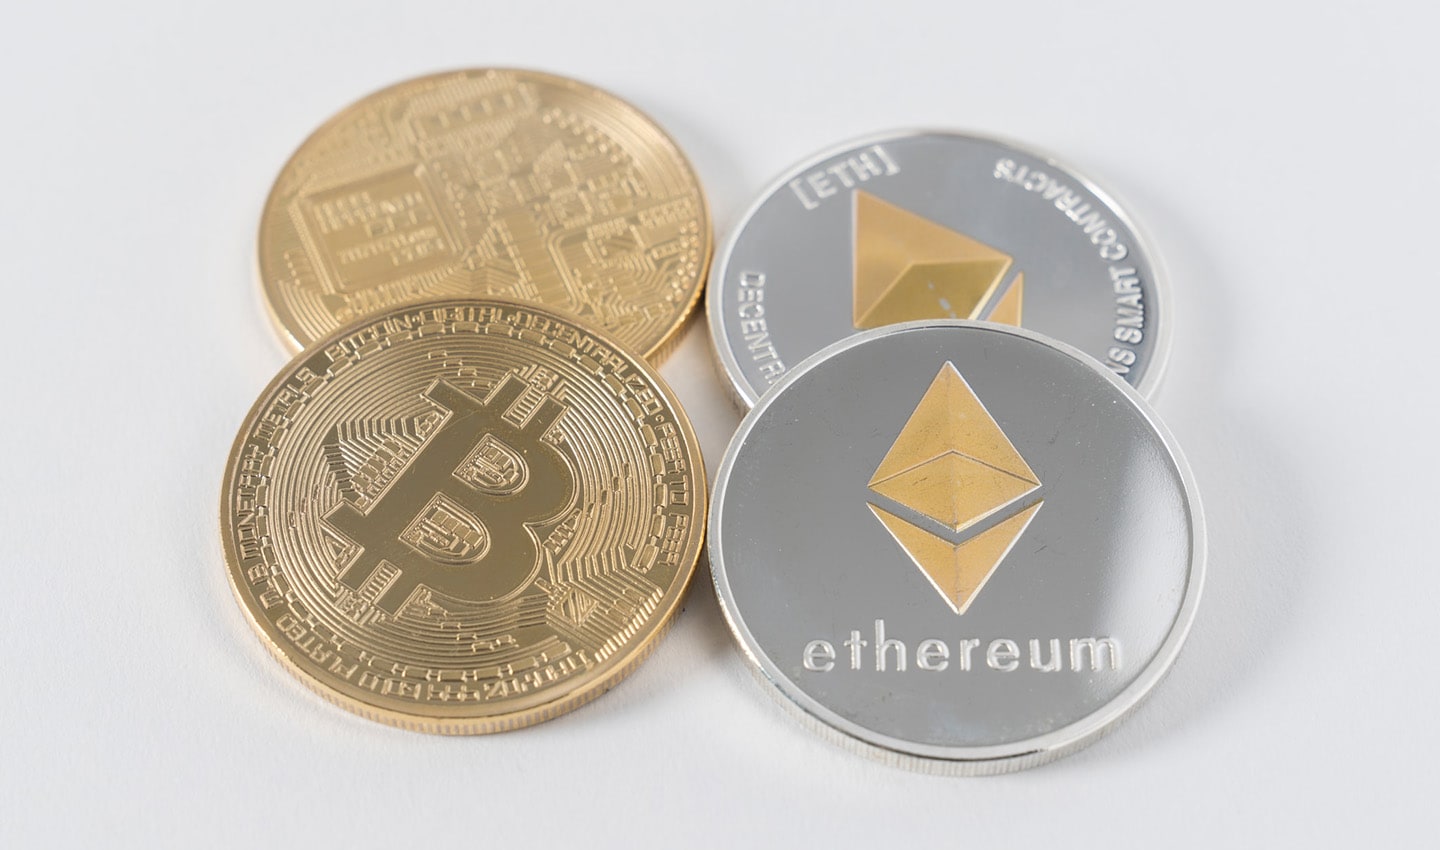 Ethereum is cryptocurrency’s second most valuable coin by market cap, Bitcoin being the most valuable. The difference however, is that the Ethereum blockchain is designed to be used for a multitude of other computing tasks, not just the delivery of a cryptocurrency.